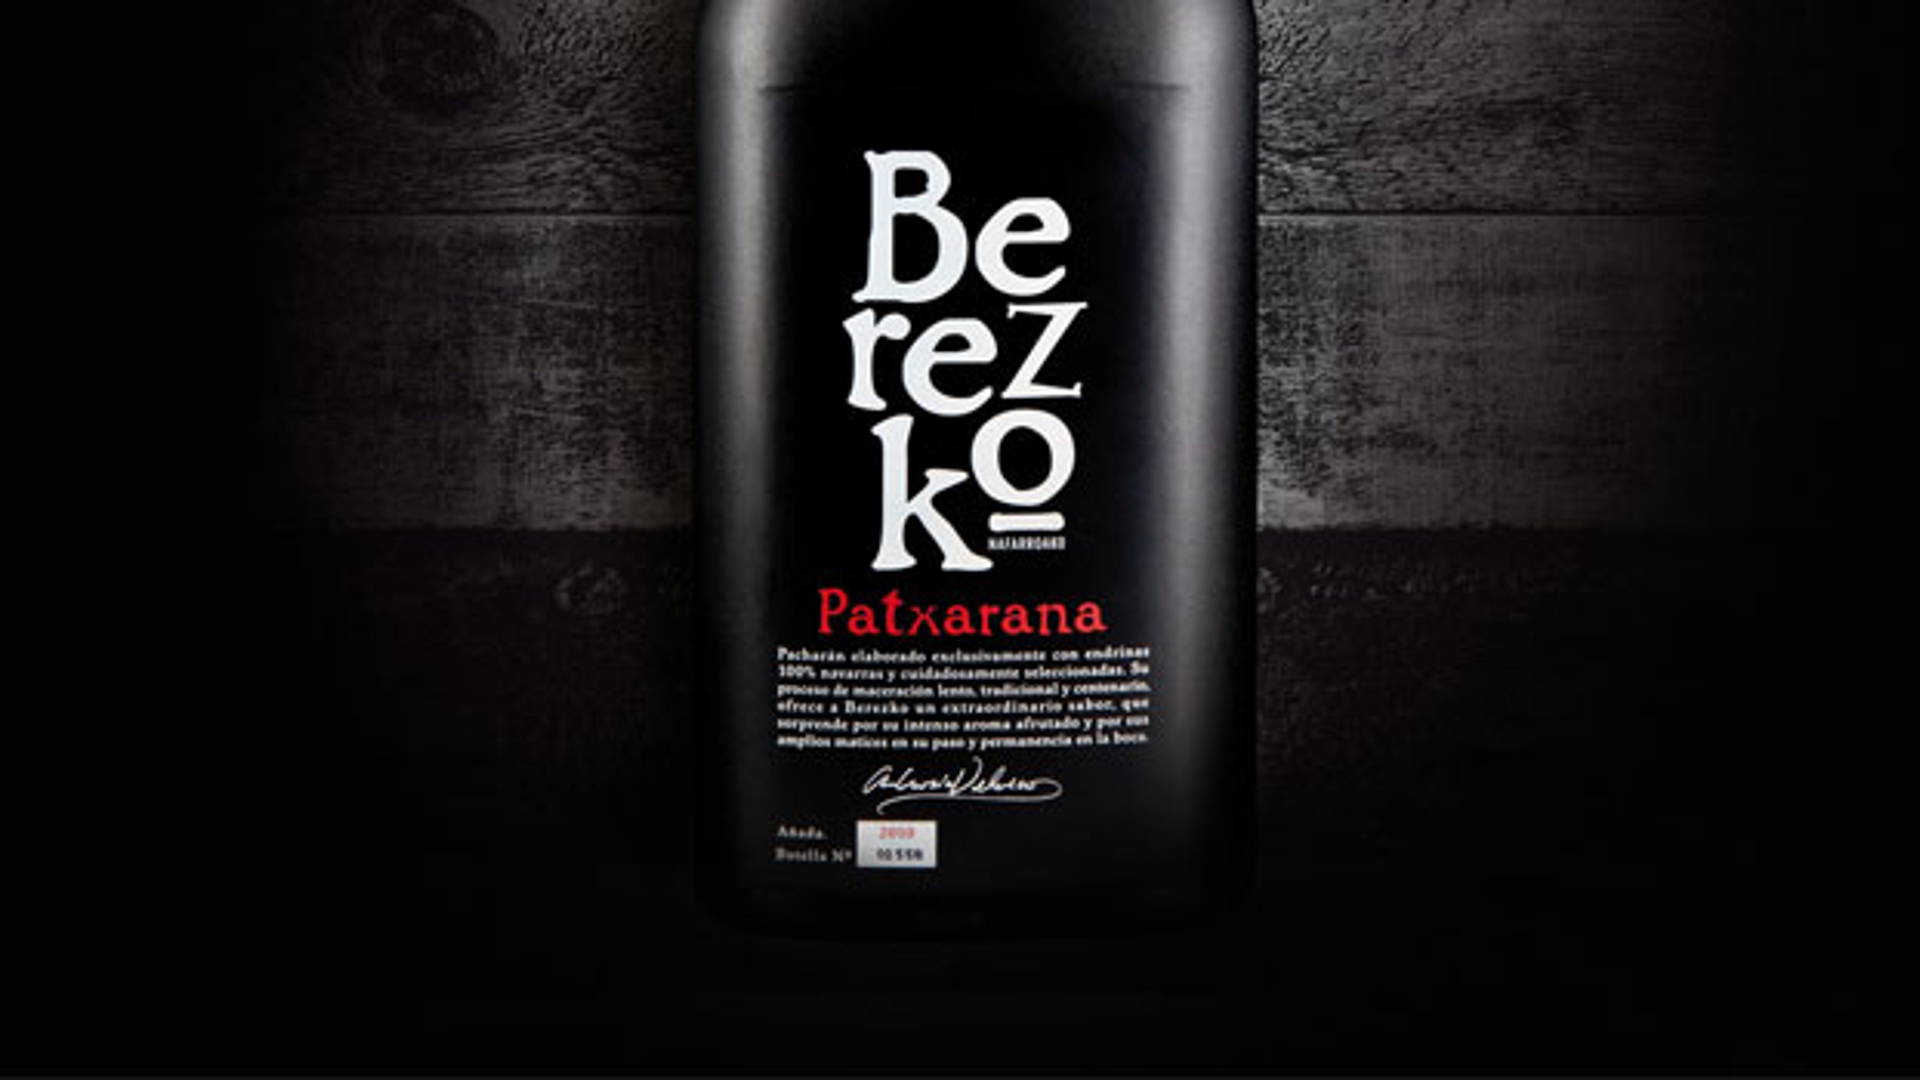 Featured image for Berezco Pacharán